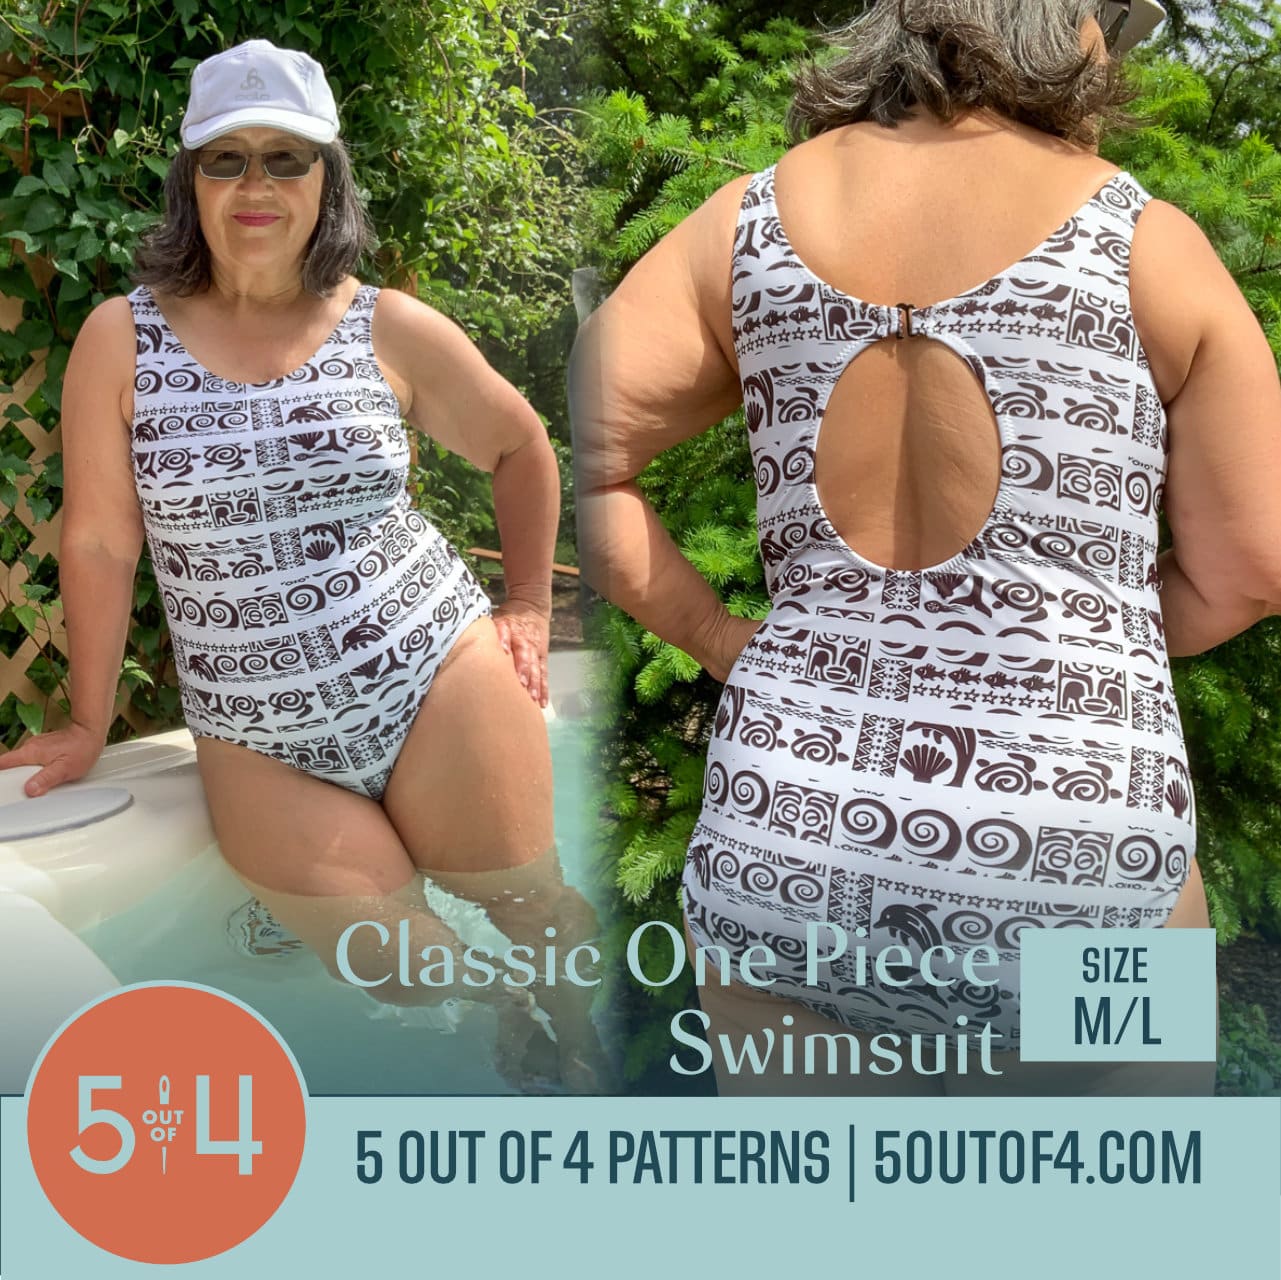 Classic One Piece Swimsuit - 5 out of 4 Patterns